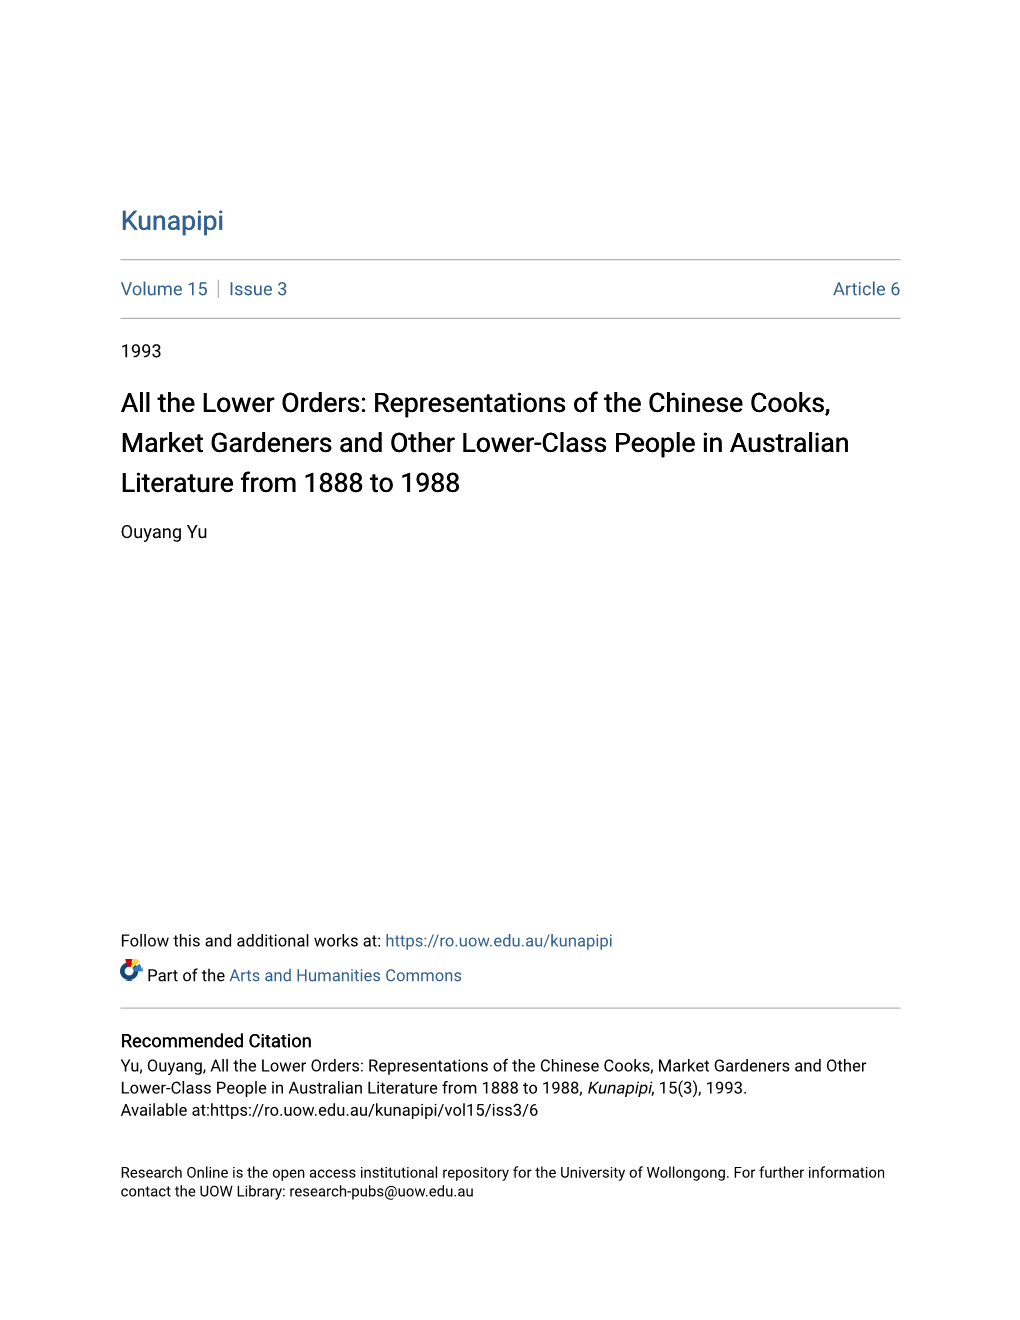 All the Lower Orders: Representations of the Chinese Cooks, Market Gardeners and Other Lower-Class People in Australian Literature from 1888 to 1988